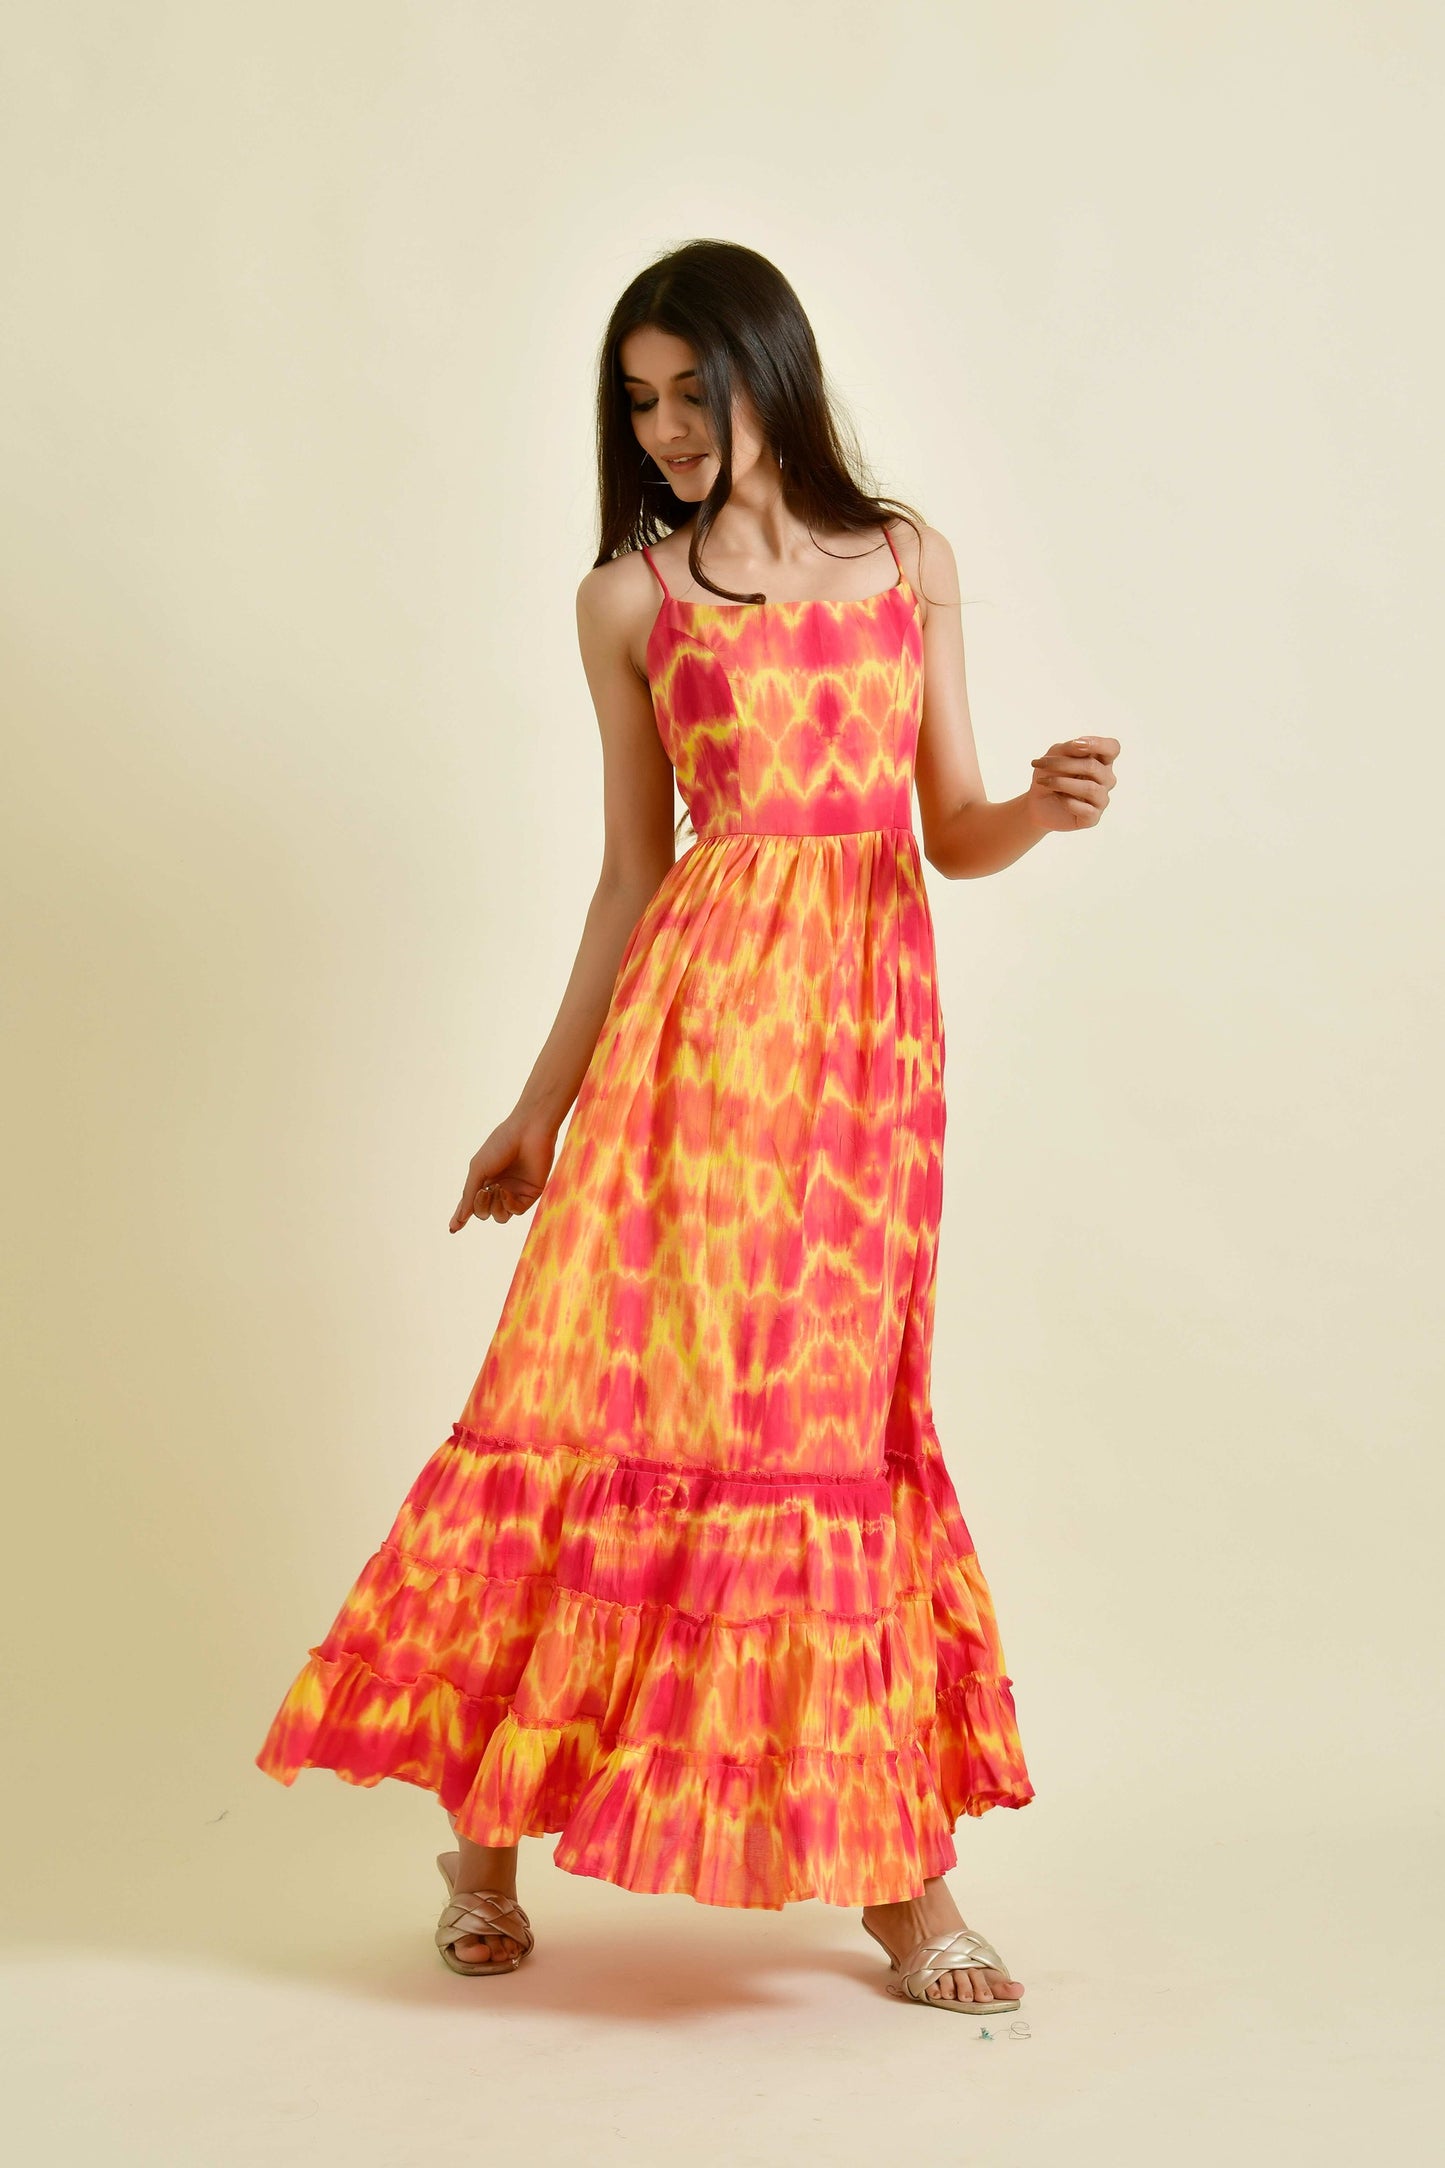 Sunkissed Hues: Red Yellow Tie Dye Dress by Style Triggers